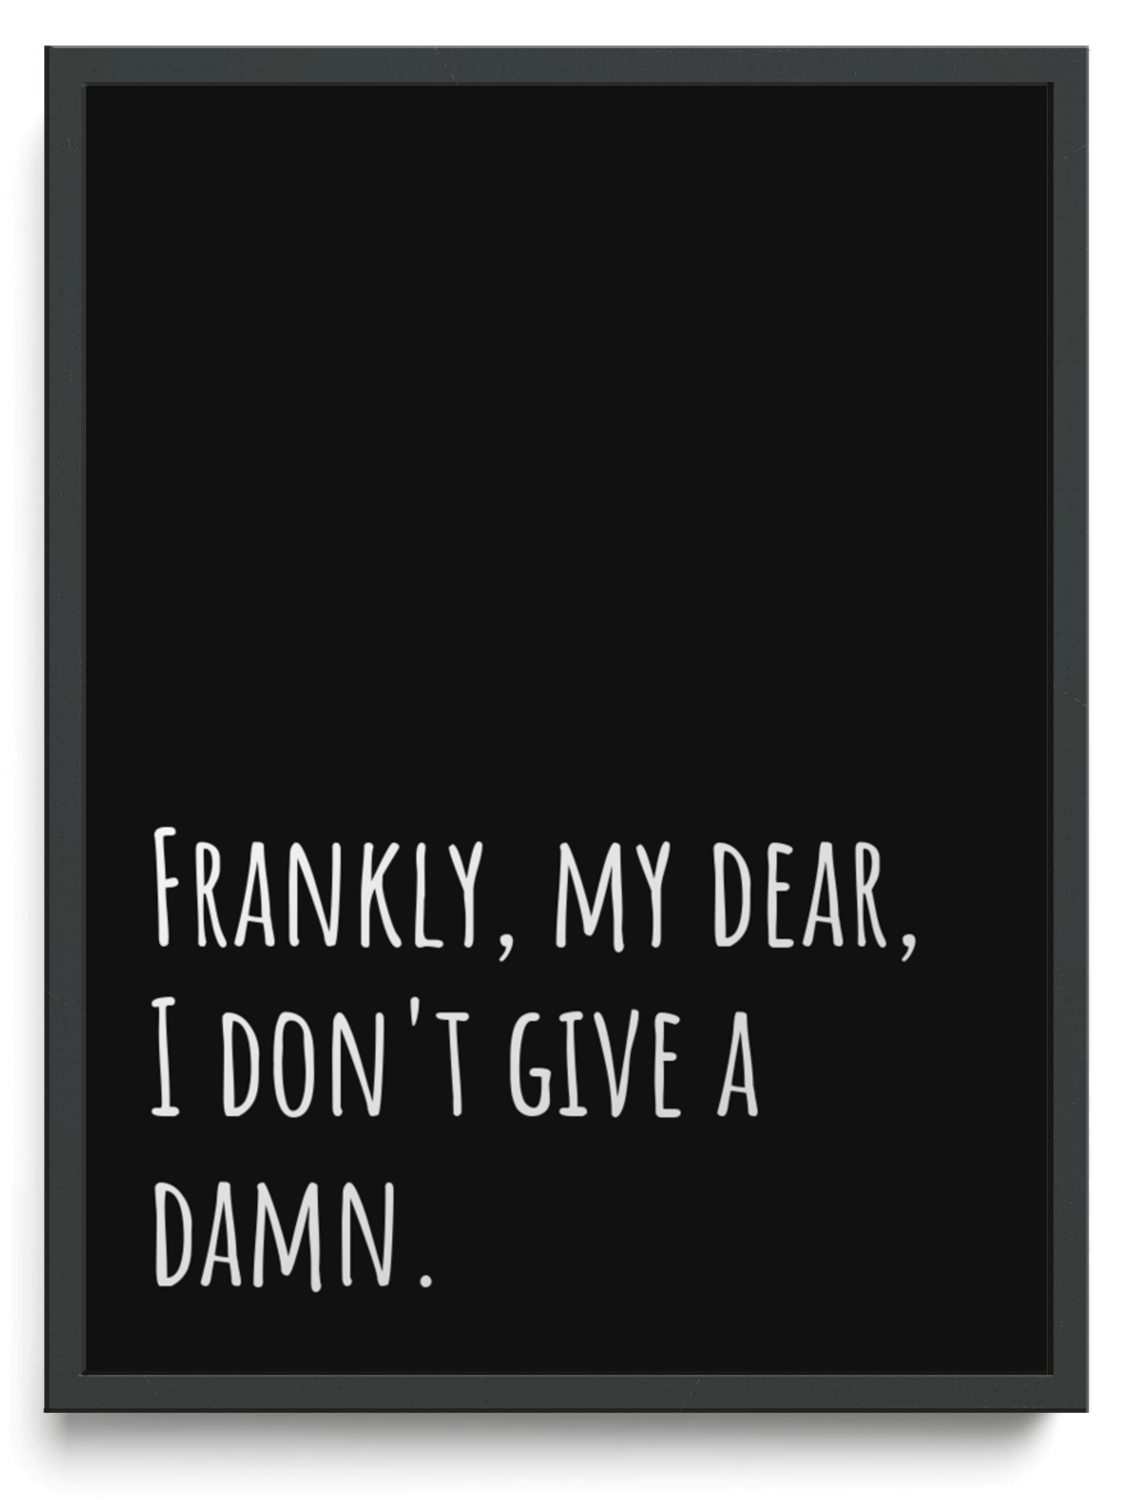 Frankly, my dear, I don't give a damn. framed typographic print